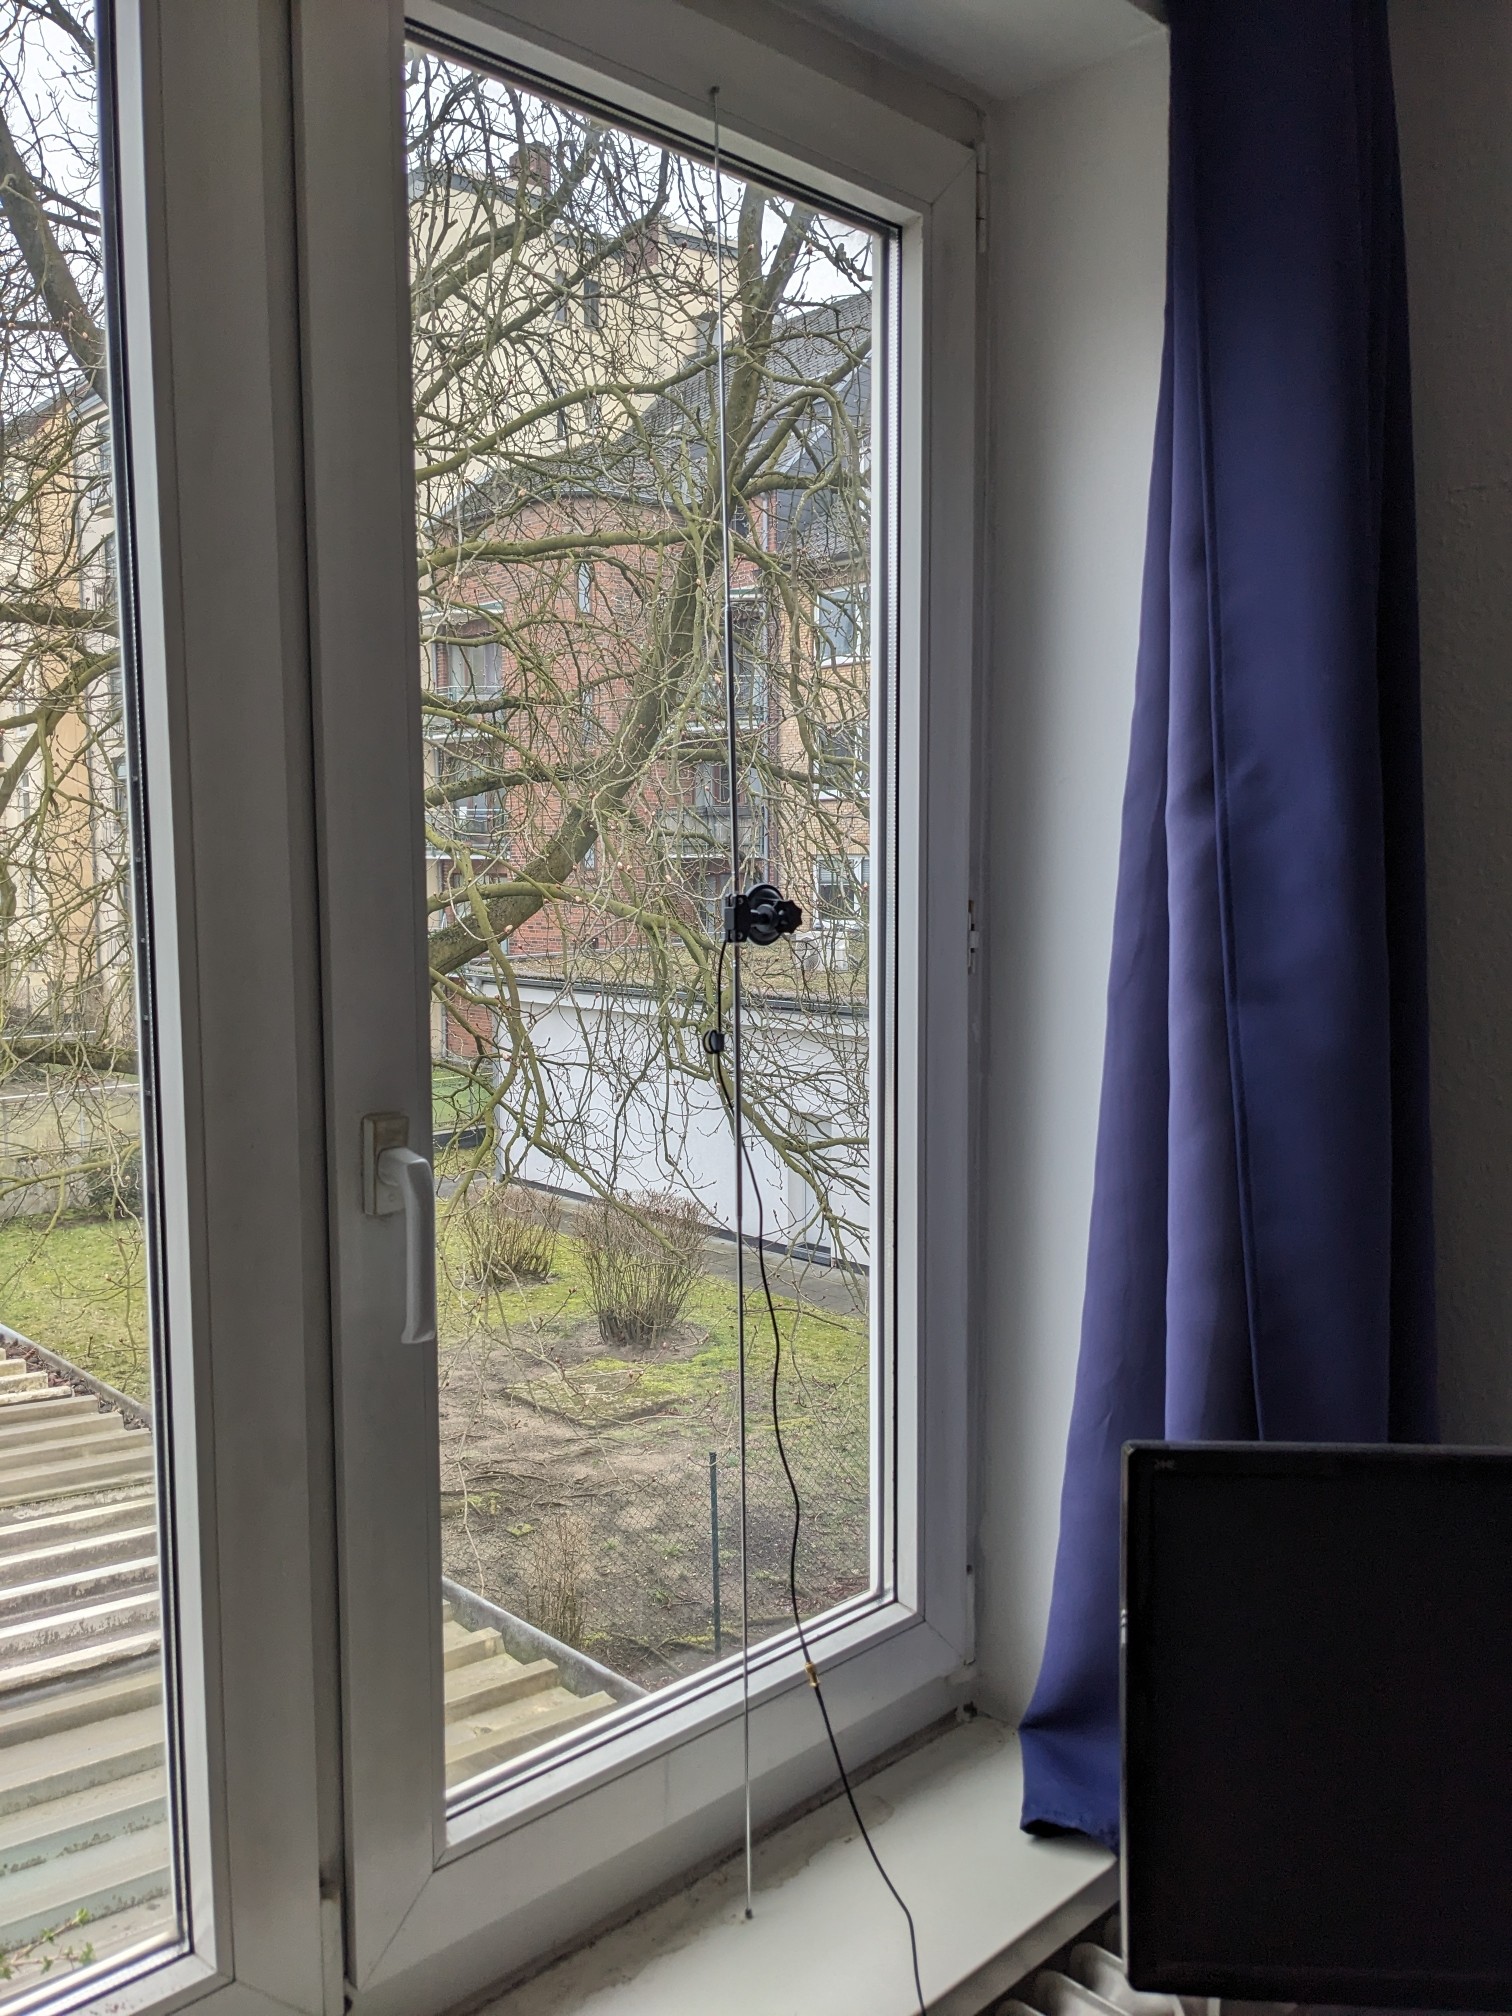 A 1.4 m long, two sided antenna, attached to my window.